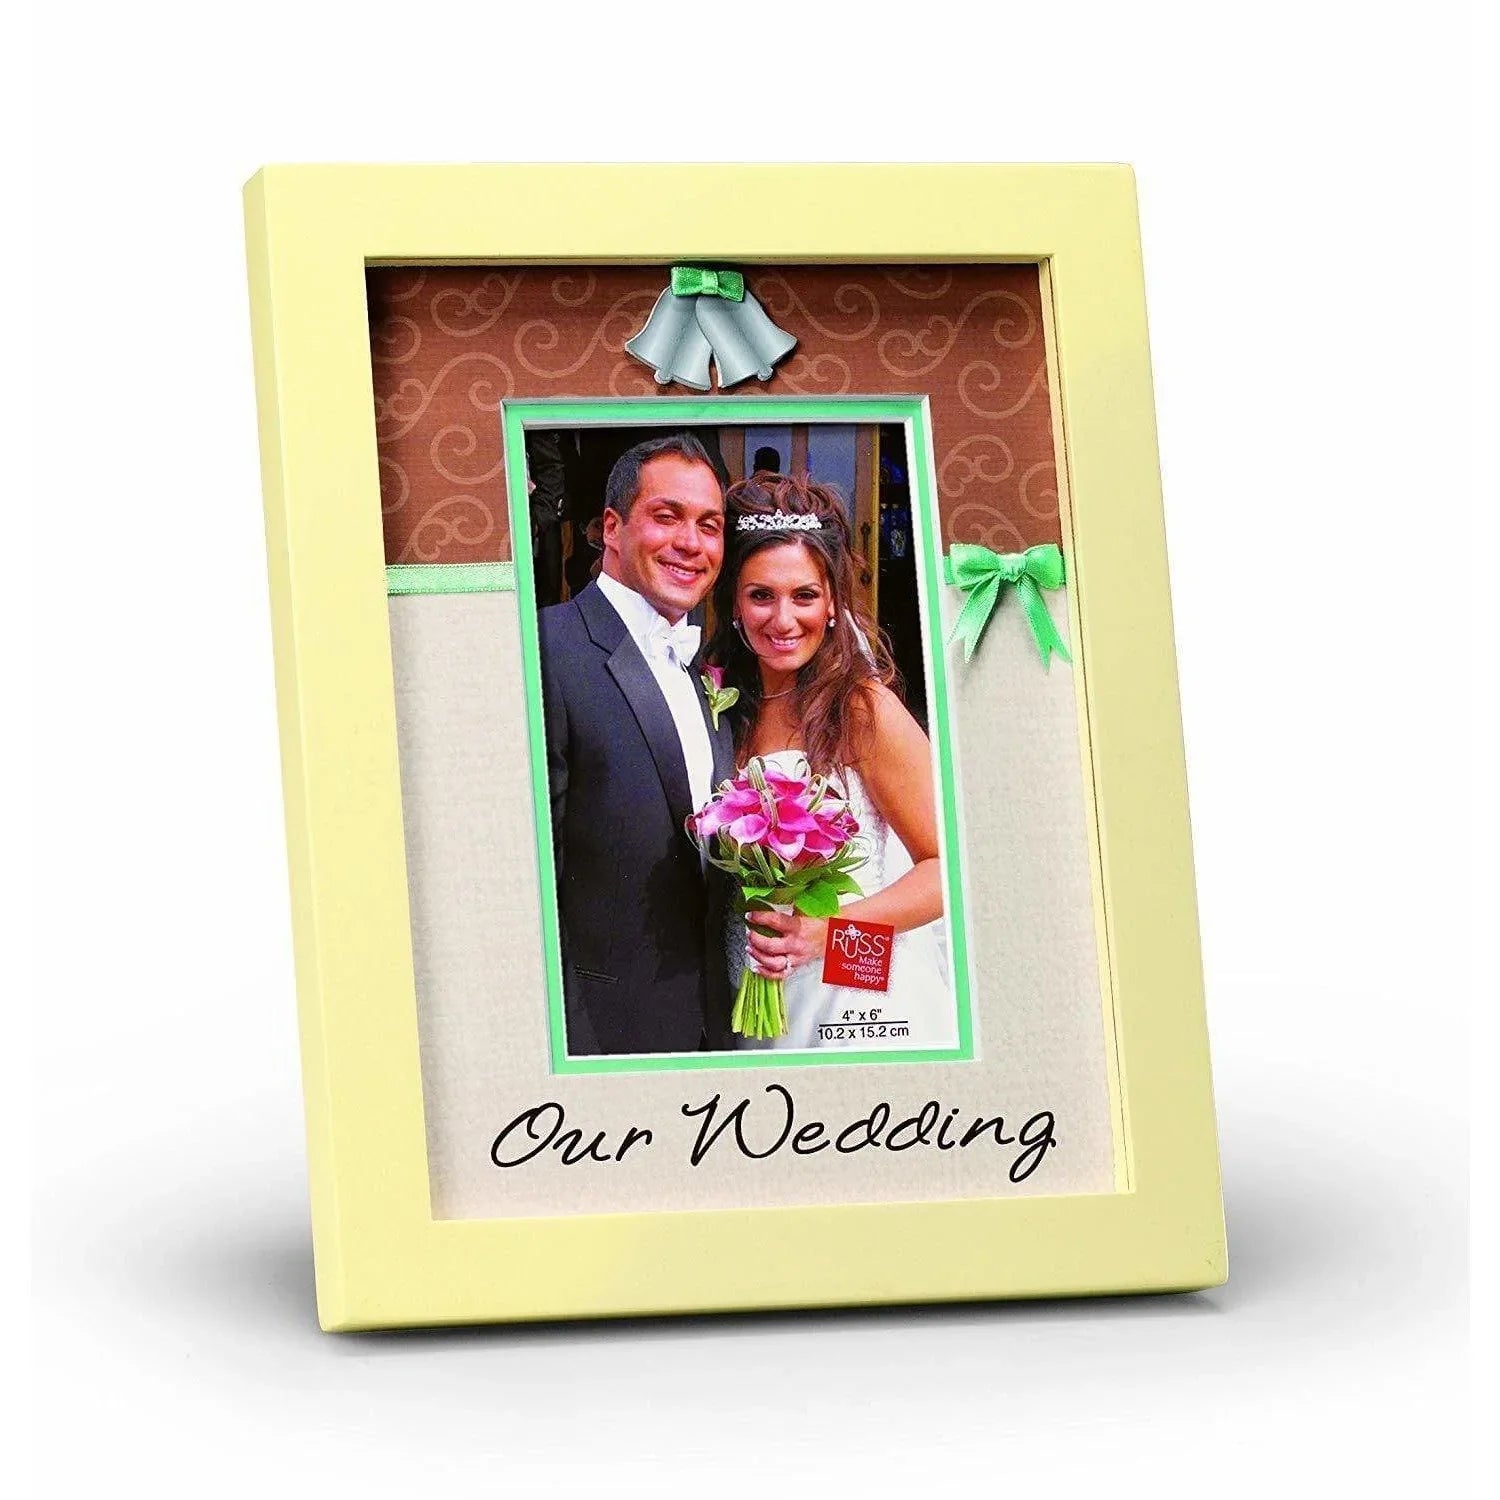 Russ Our Wedding Day Wood Frame, 4 by 6-Inch